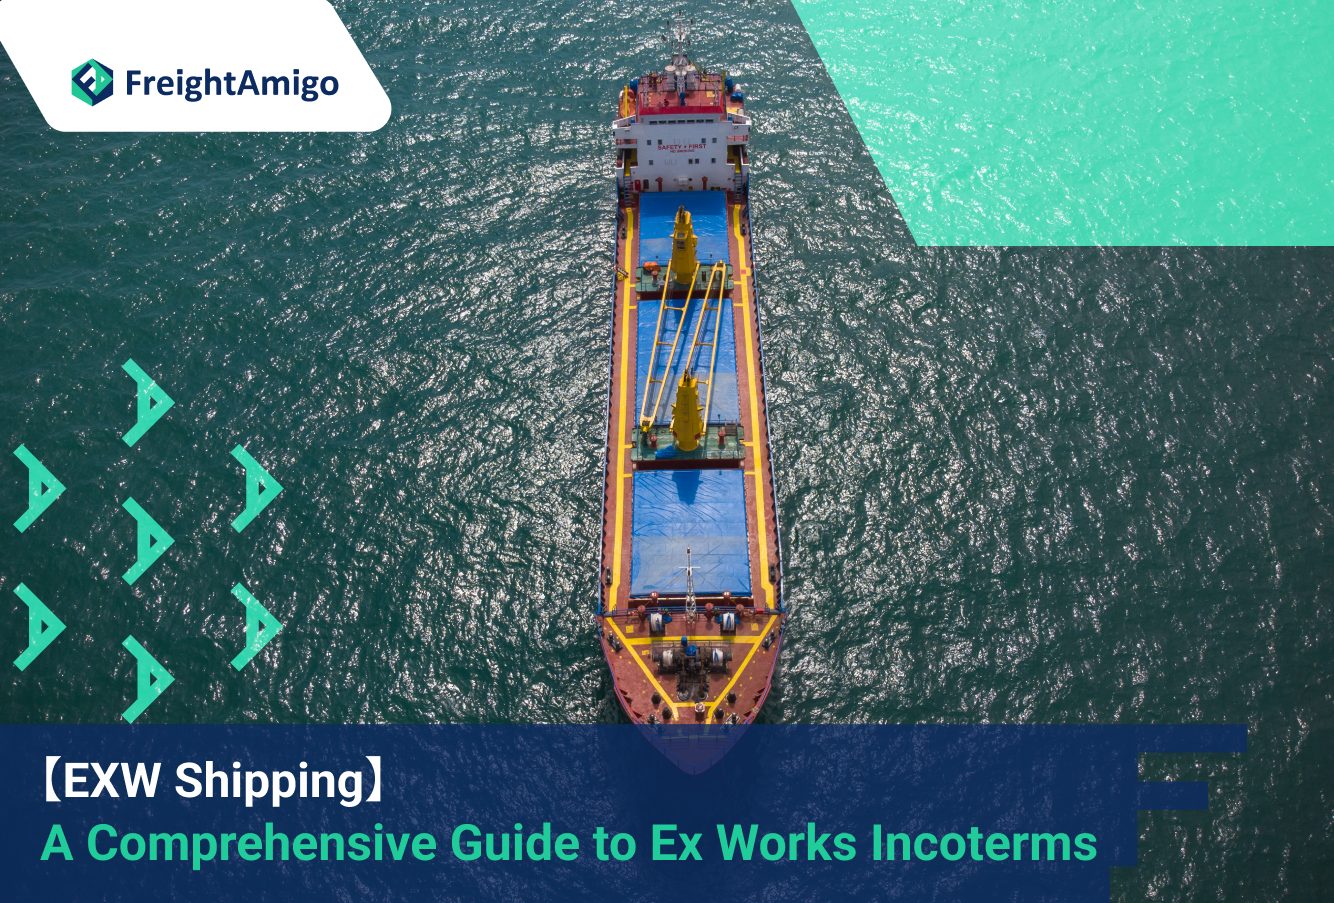 EXW Shipping – A Comprehensive Guide to Ex Works Incoterms